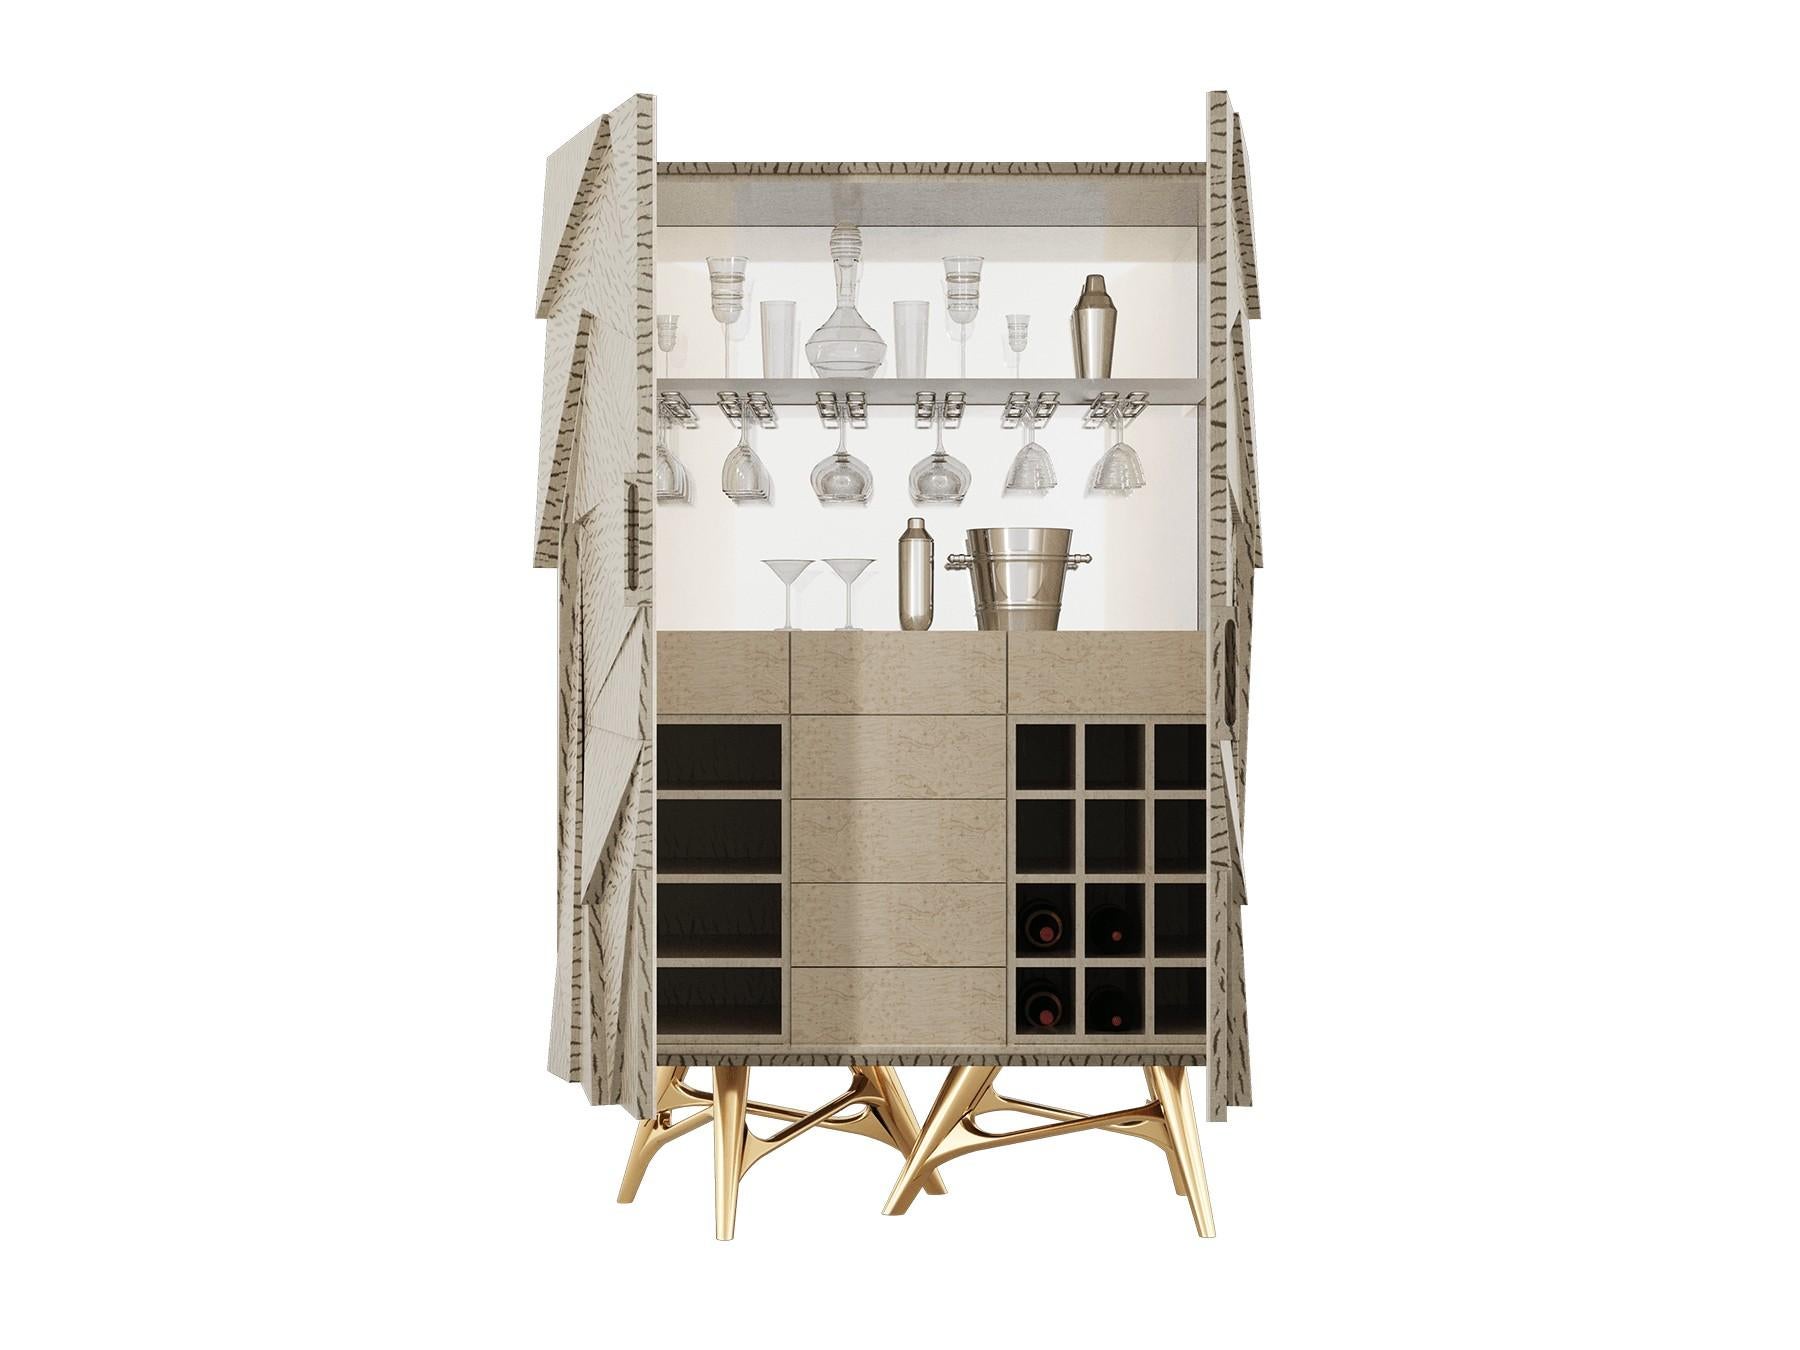 Rosalia Cabinet is an outstanding modern style design. This bar cabinet combines harmonious shapes and materials. An elegant theatrical shape to store your favorite drinks and be part of your high-end design project.

Materials: Body in Gloss Zebra